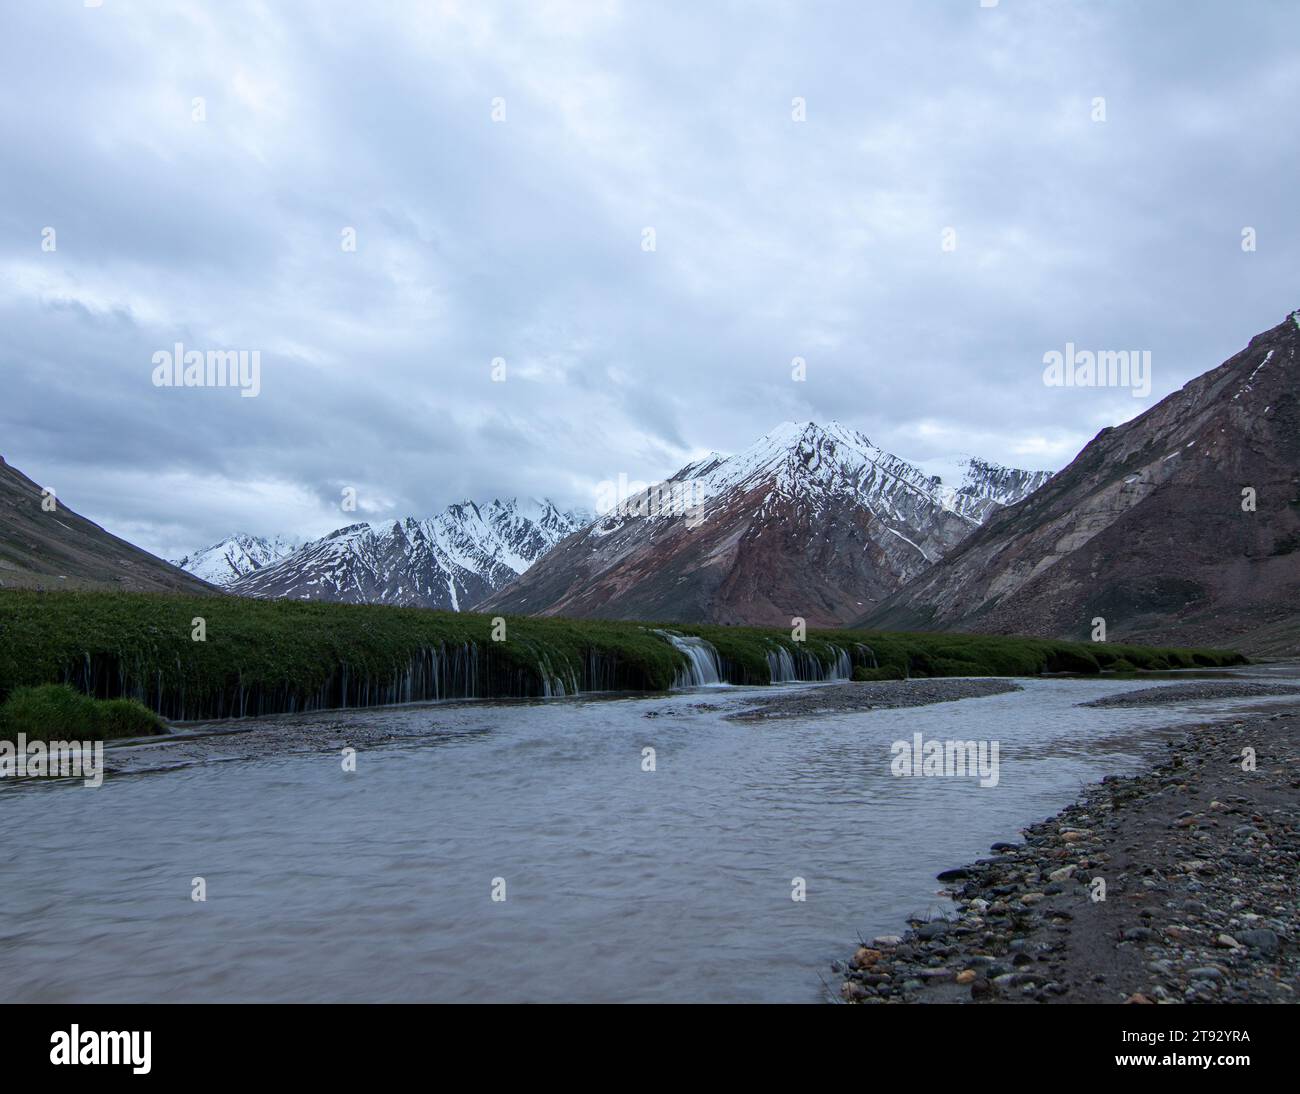 Long exposure landscape photo of snow capped peaks with water flowing like sand in foreground. Stock Photo